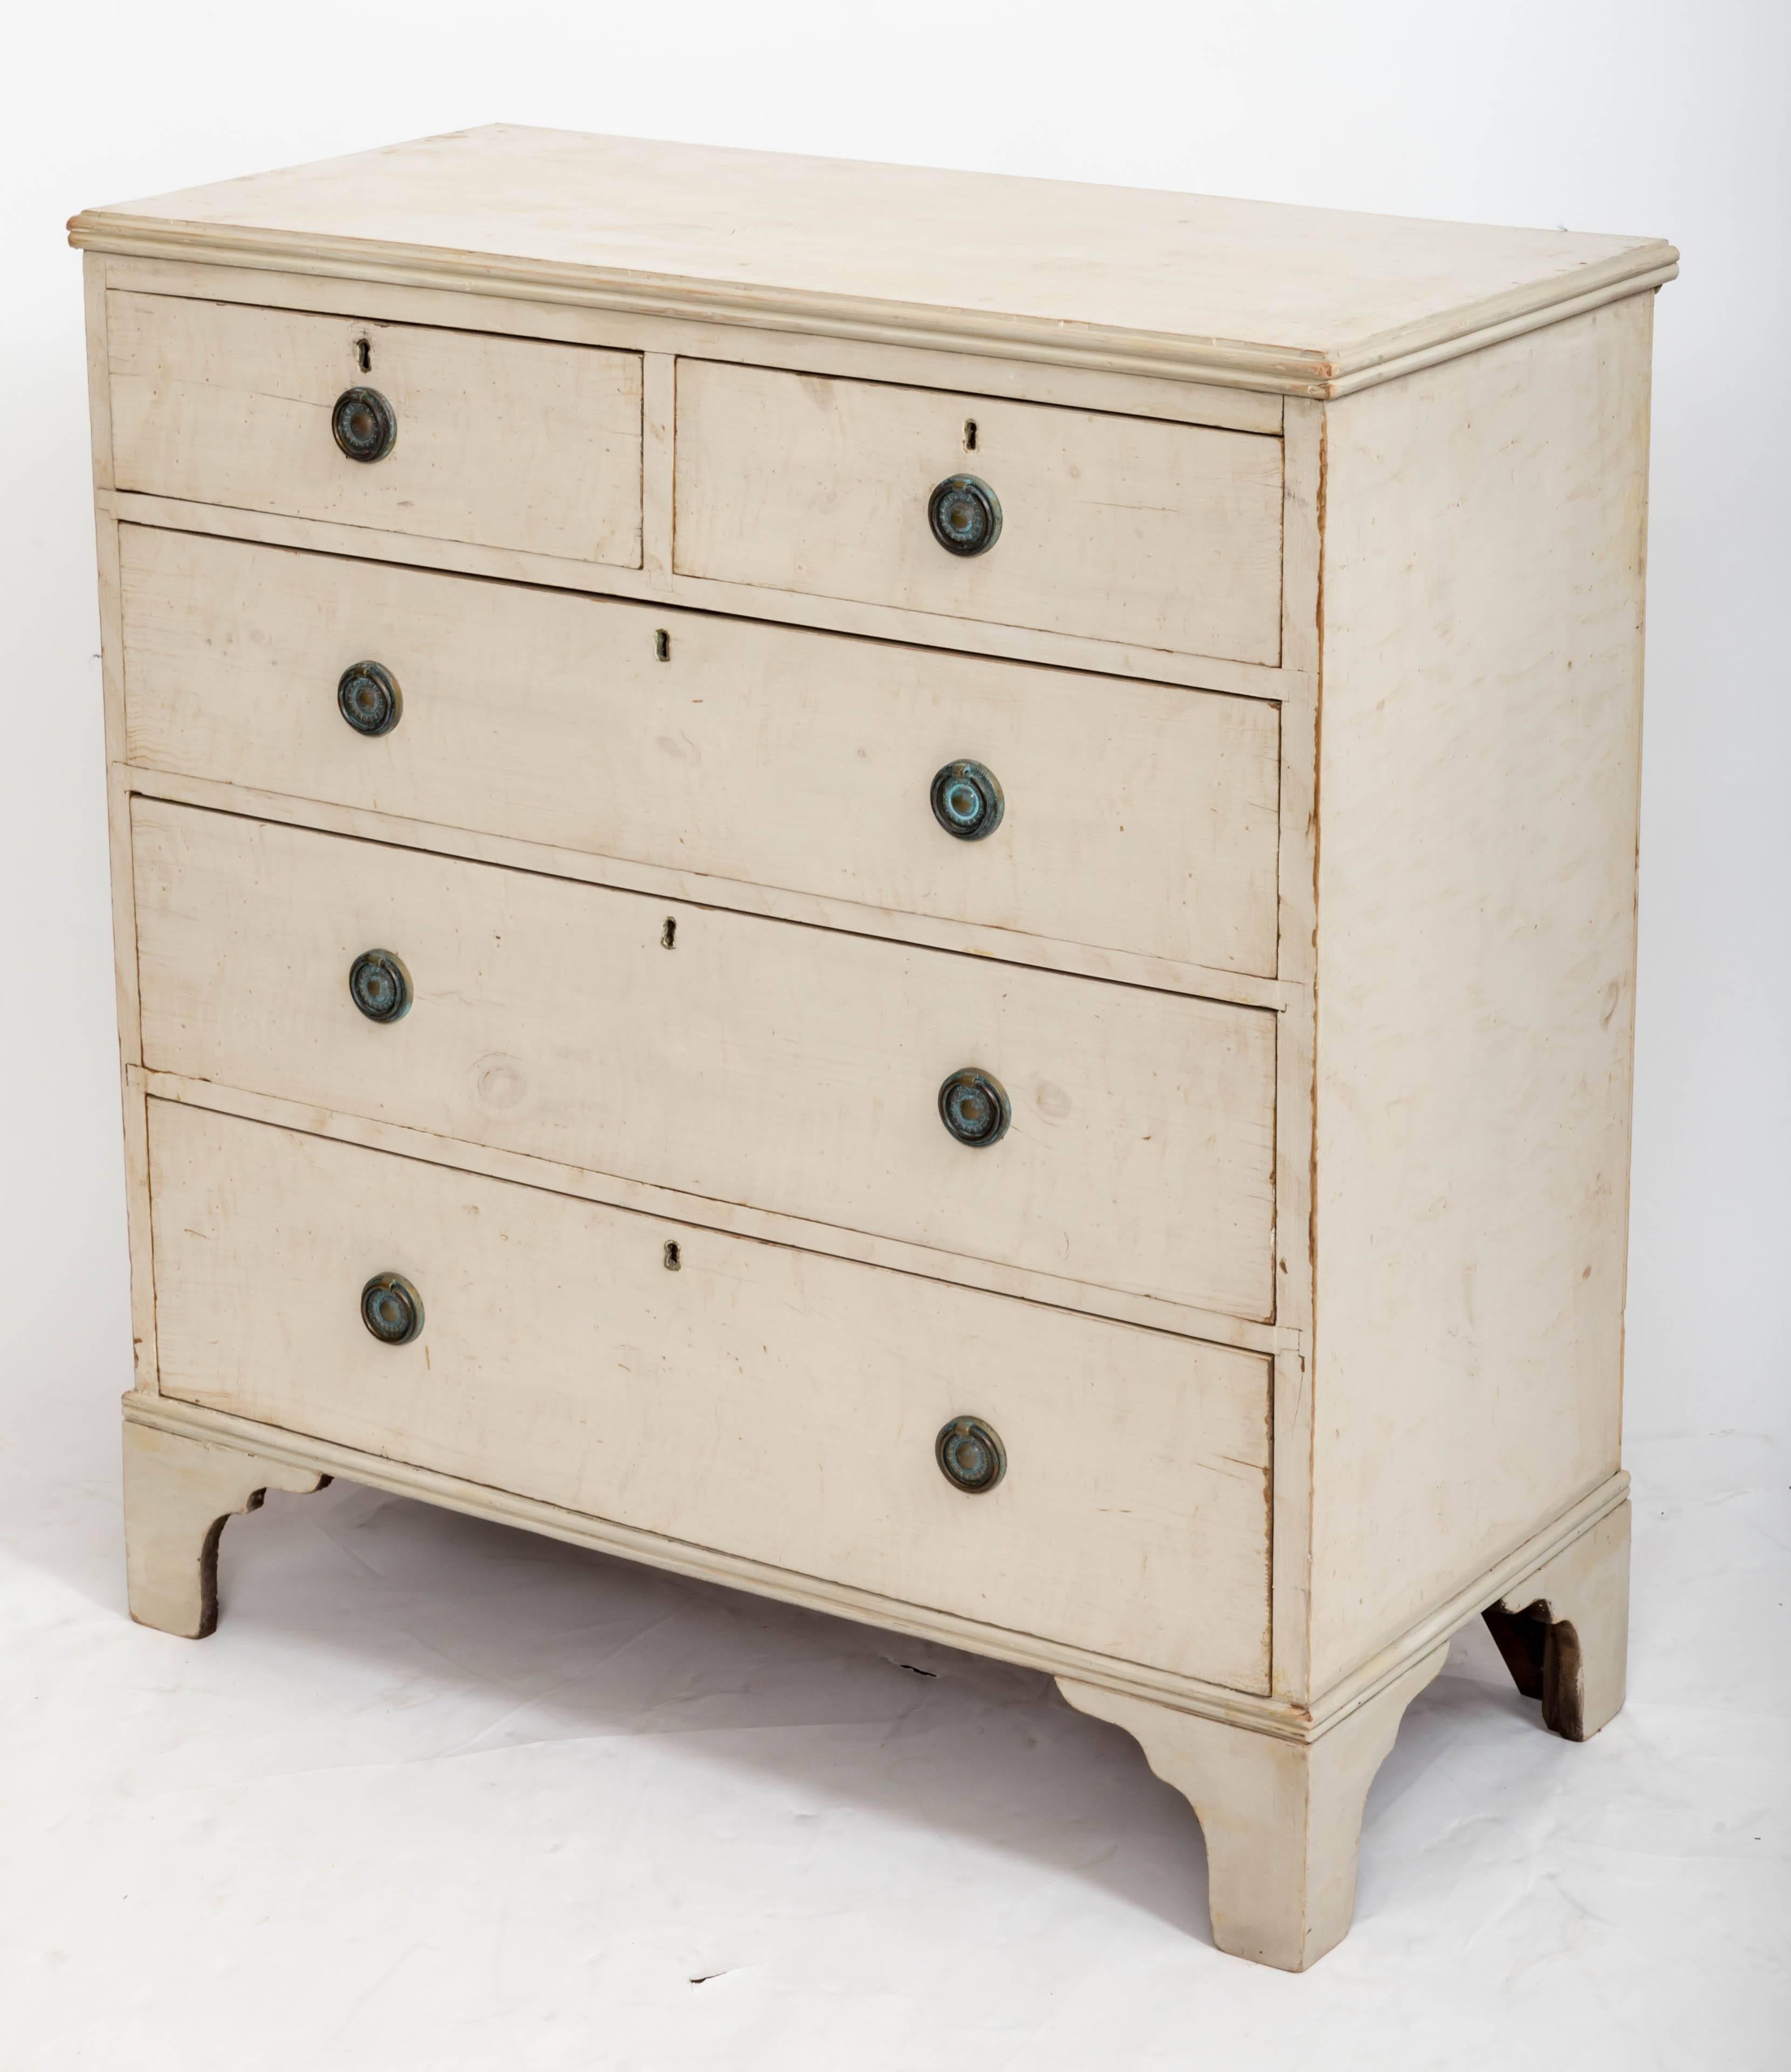 A handsome painted chest of drawers, original crème paint, five drawers ( two short over three long), braded feet, antique pulls.